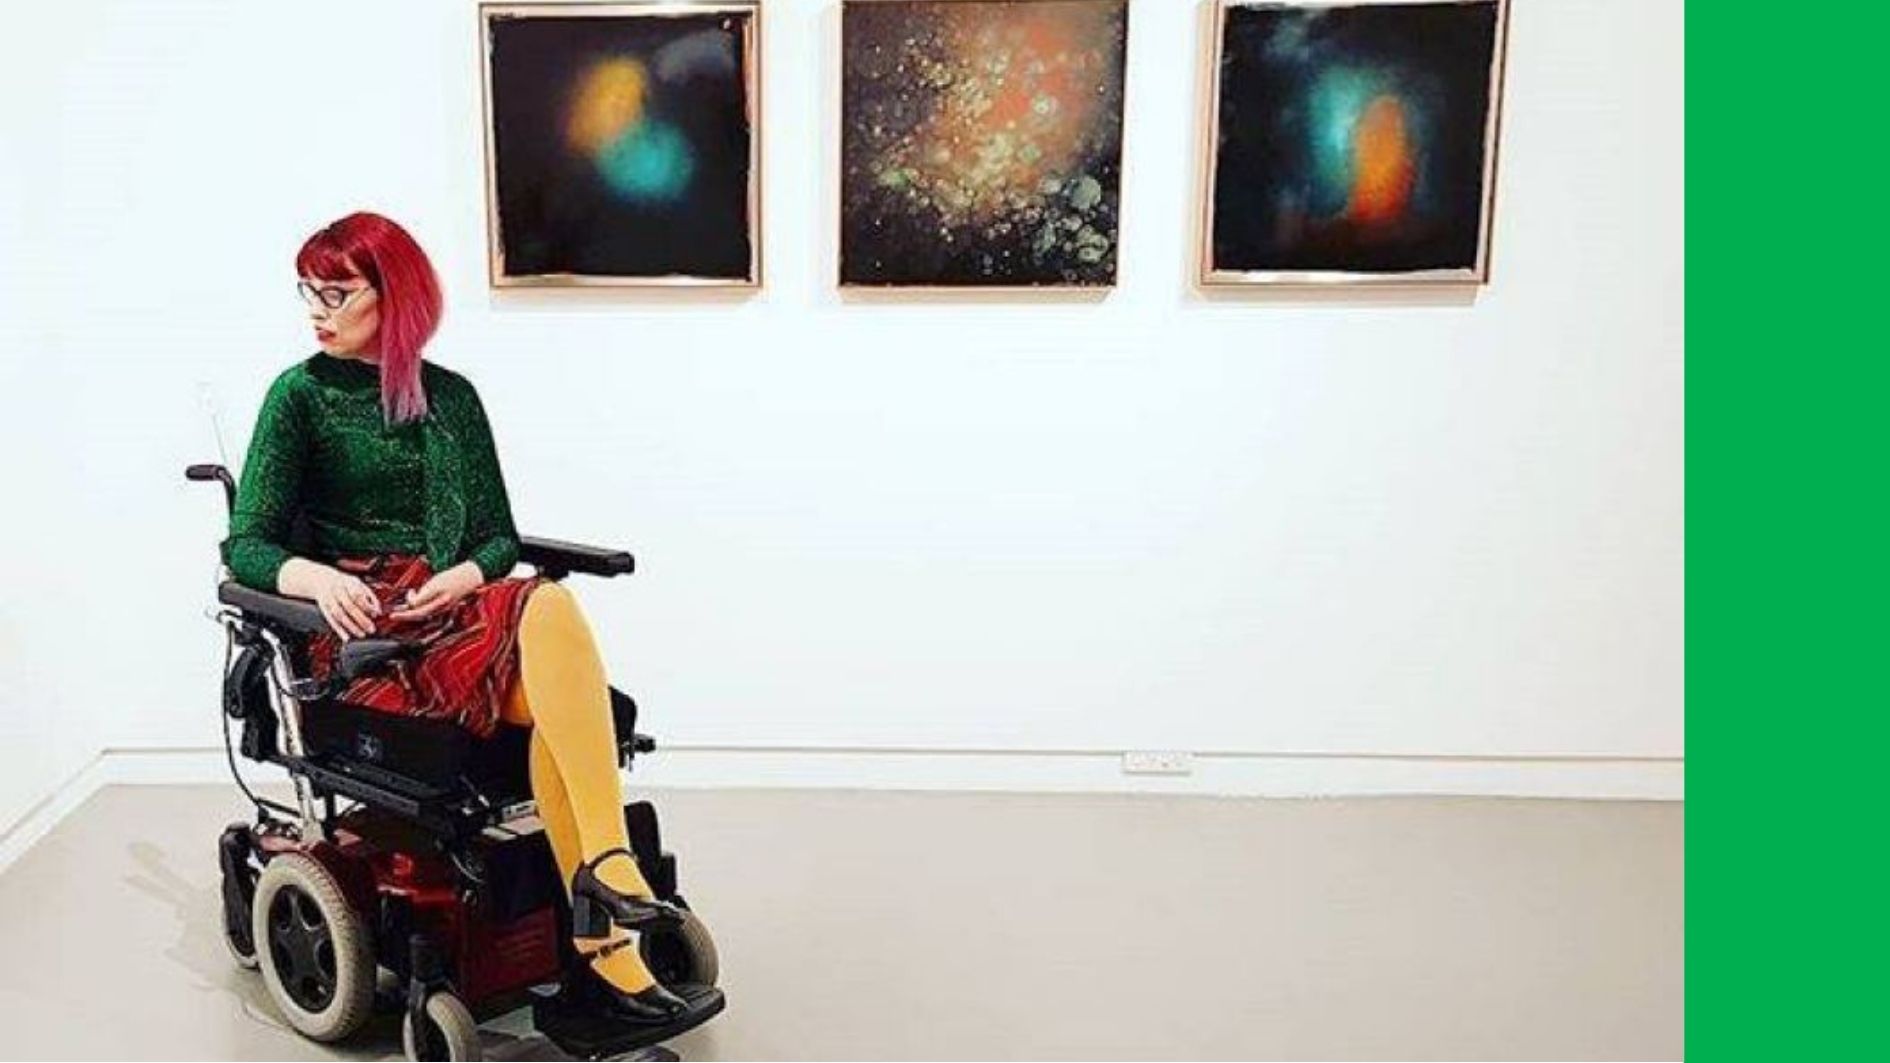 Image Description: A wheelchair user with pink hair and bright clothing is at an exhibition in front of three colourful artworks.